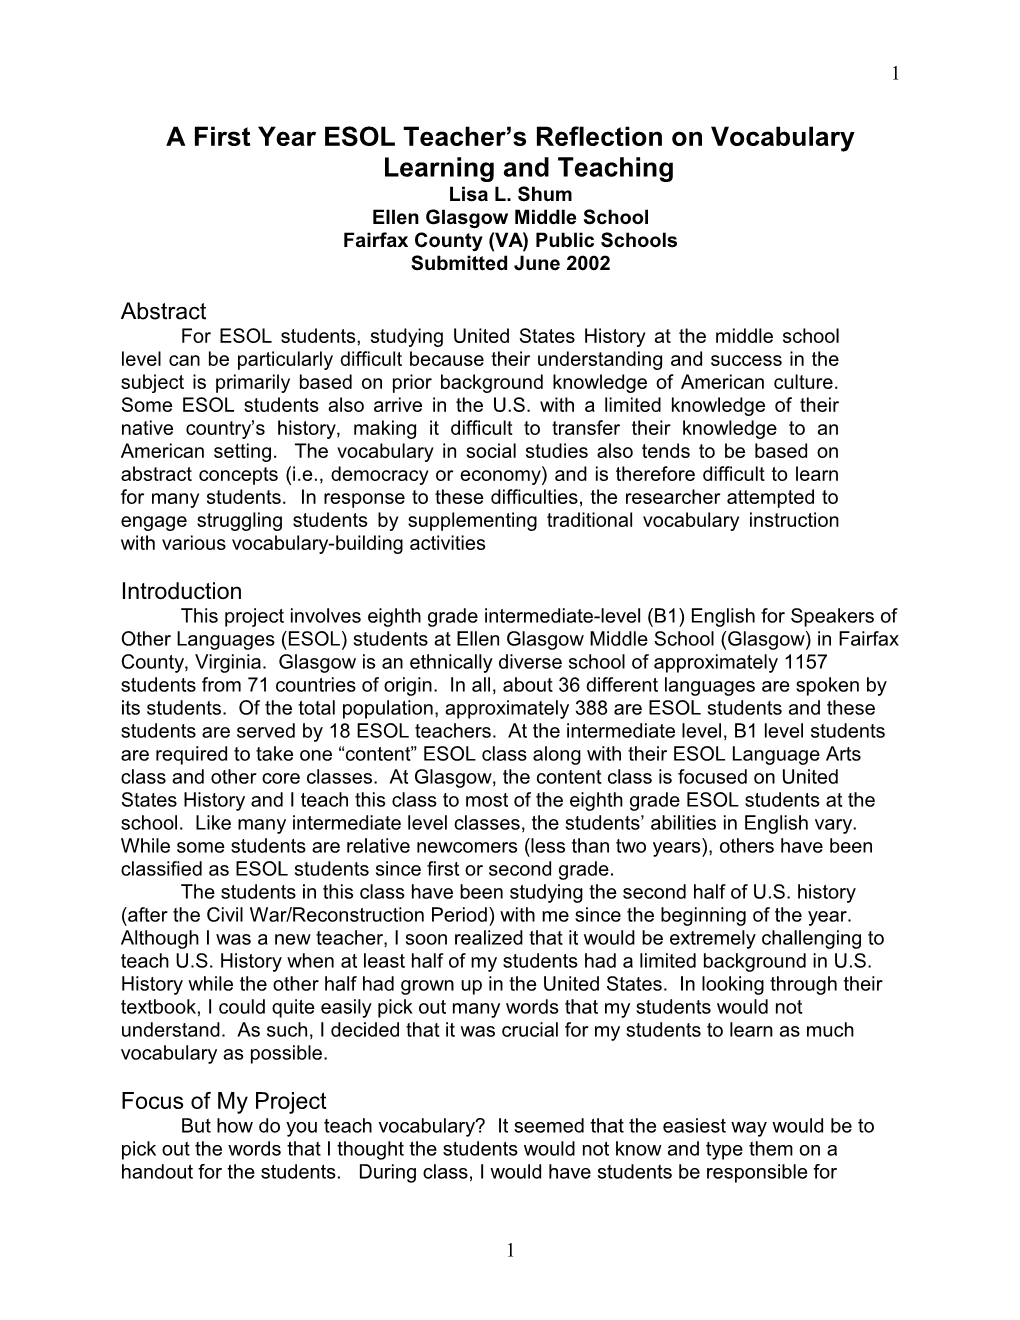 A First Year ESOL Teacher S Reflection on Vocabulary Learning and Teaching